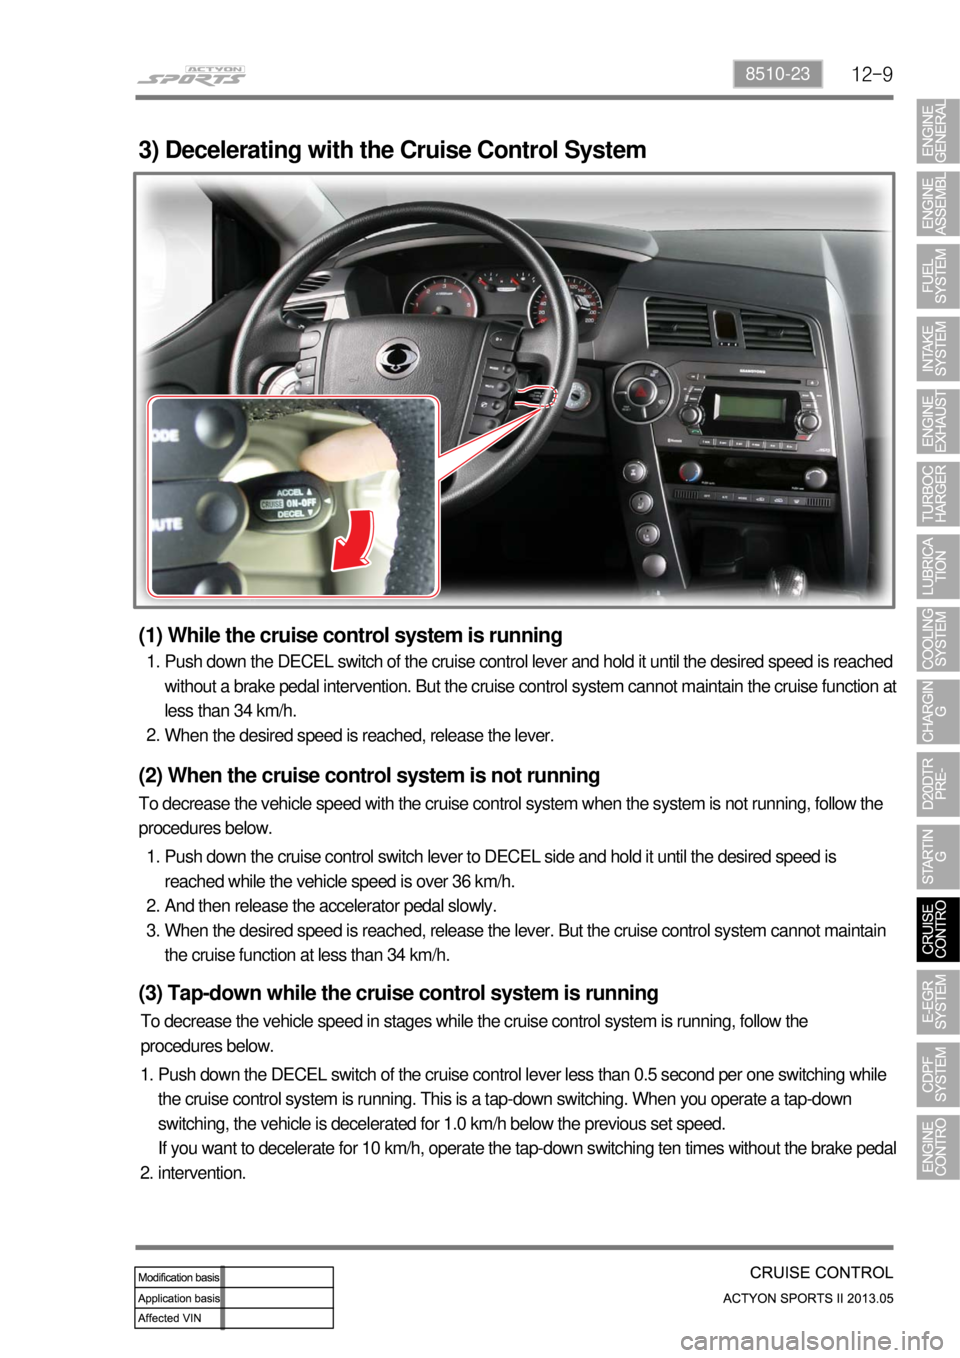 SSANGYONG NEW ACTYON SPORTS 2013  Service Manual 12-98510-23
3) Decelerating with the Cruise Control System
(1) While the cruise control system is running
Push down the DECEL switch of the cruise control lever and hold it until the desired speed is 